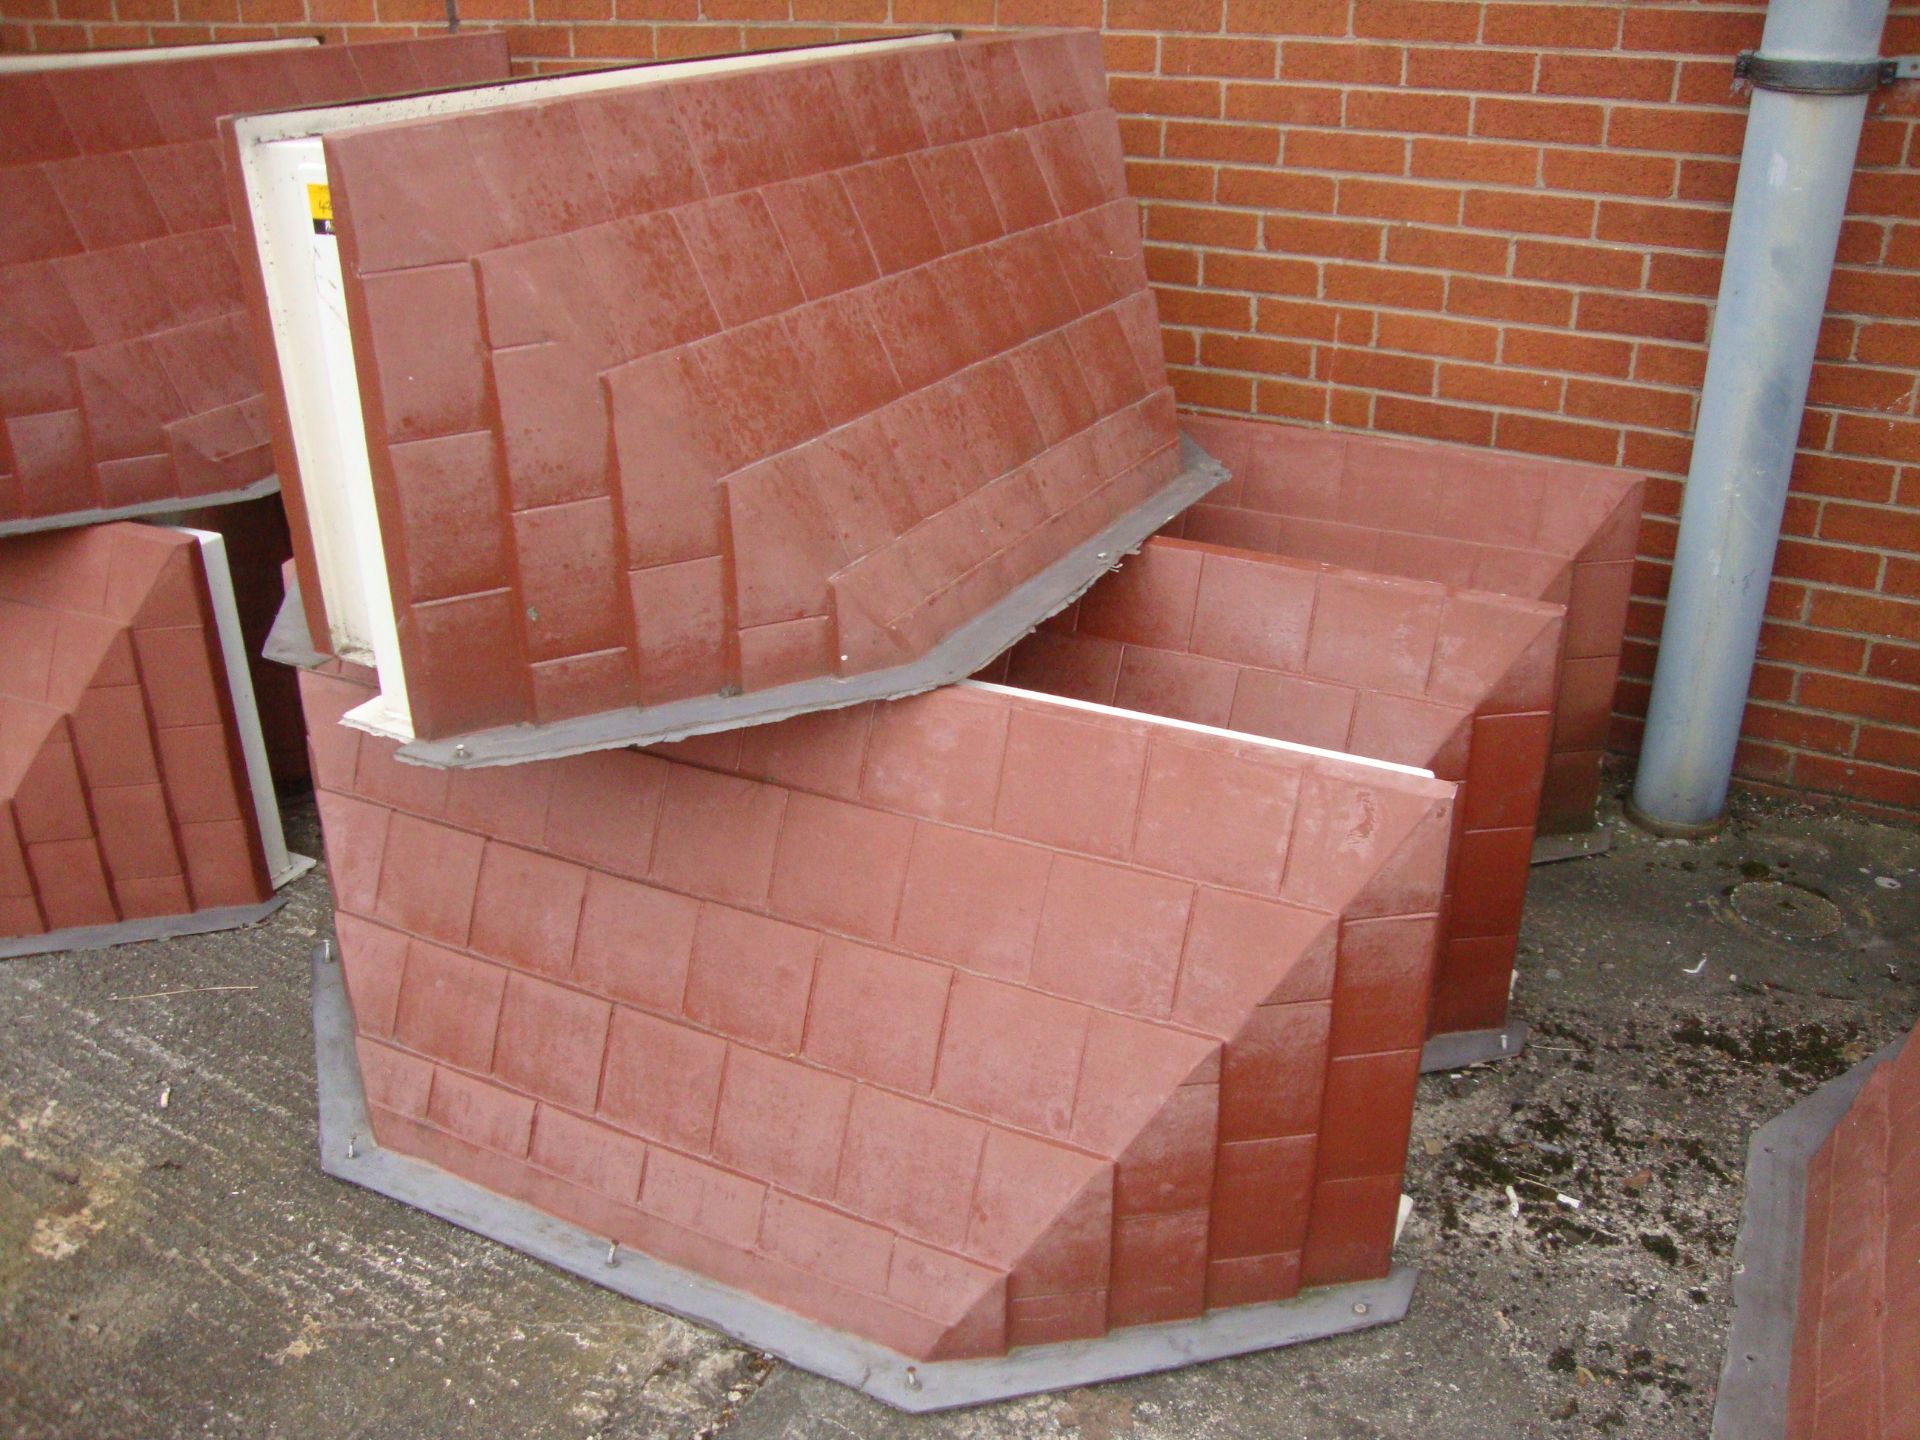 10 off canopies in brick red & white colour, each circa 1.66m wide, for exterior use above a - Image 2 of 4